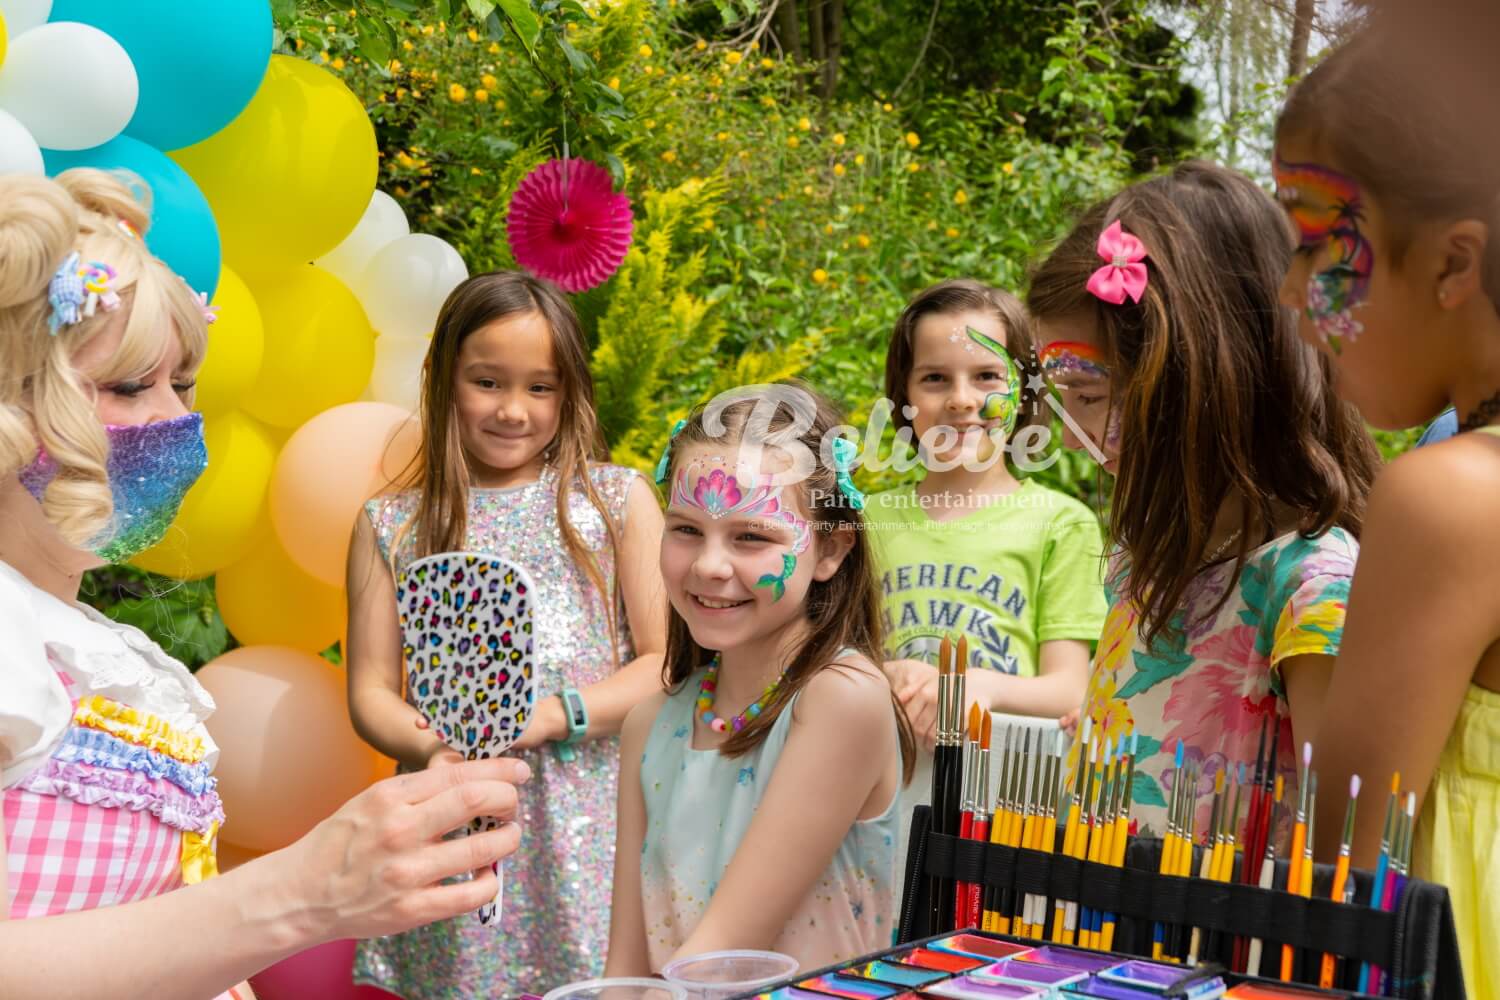 Choosing the Best face painter for your kids' birthday party